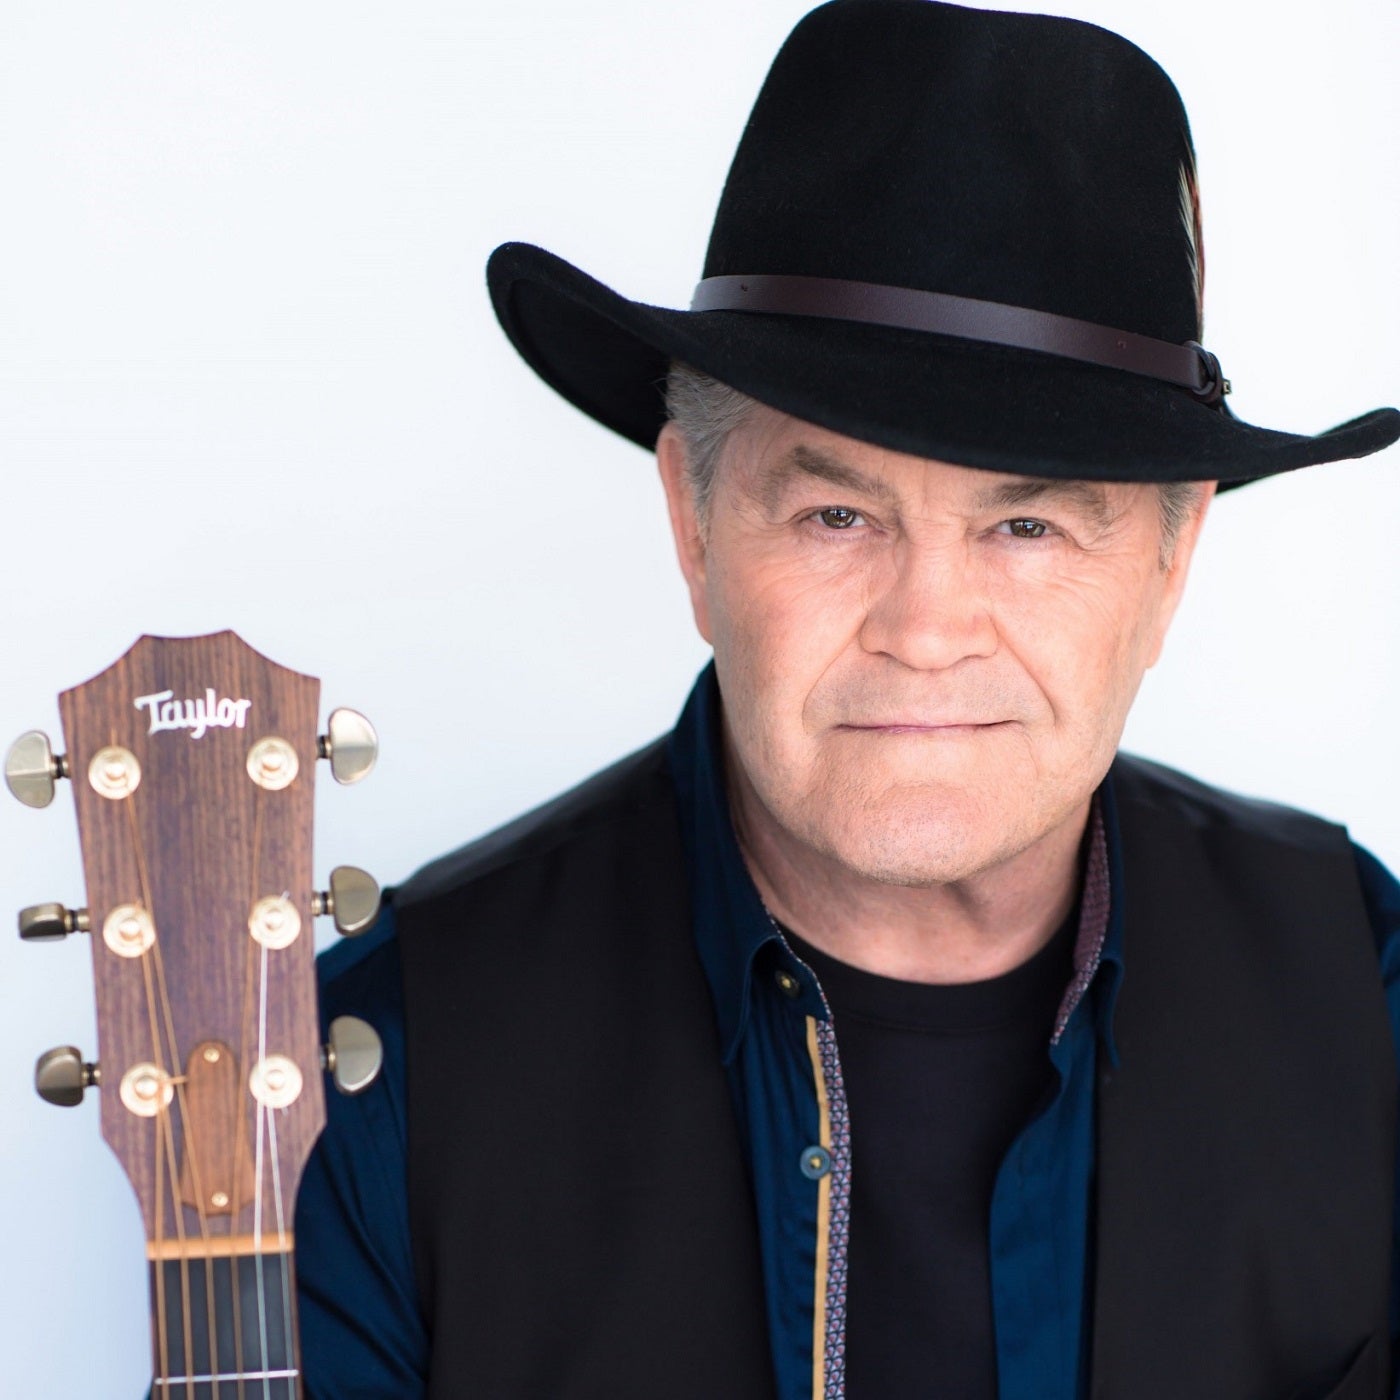 FabFest – Micky Dolenz: The Voice of the Monkees